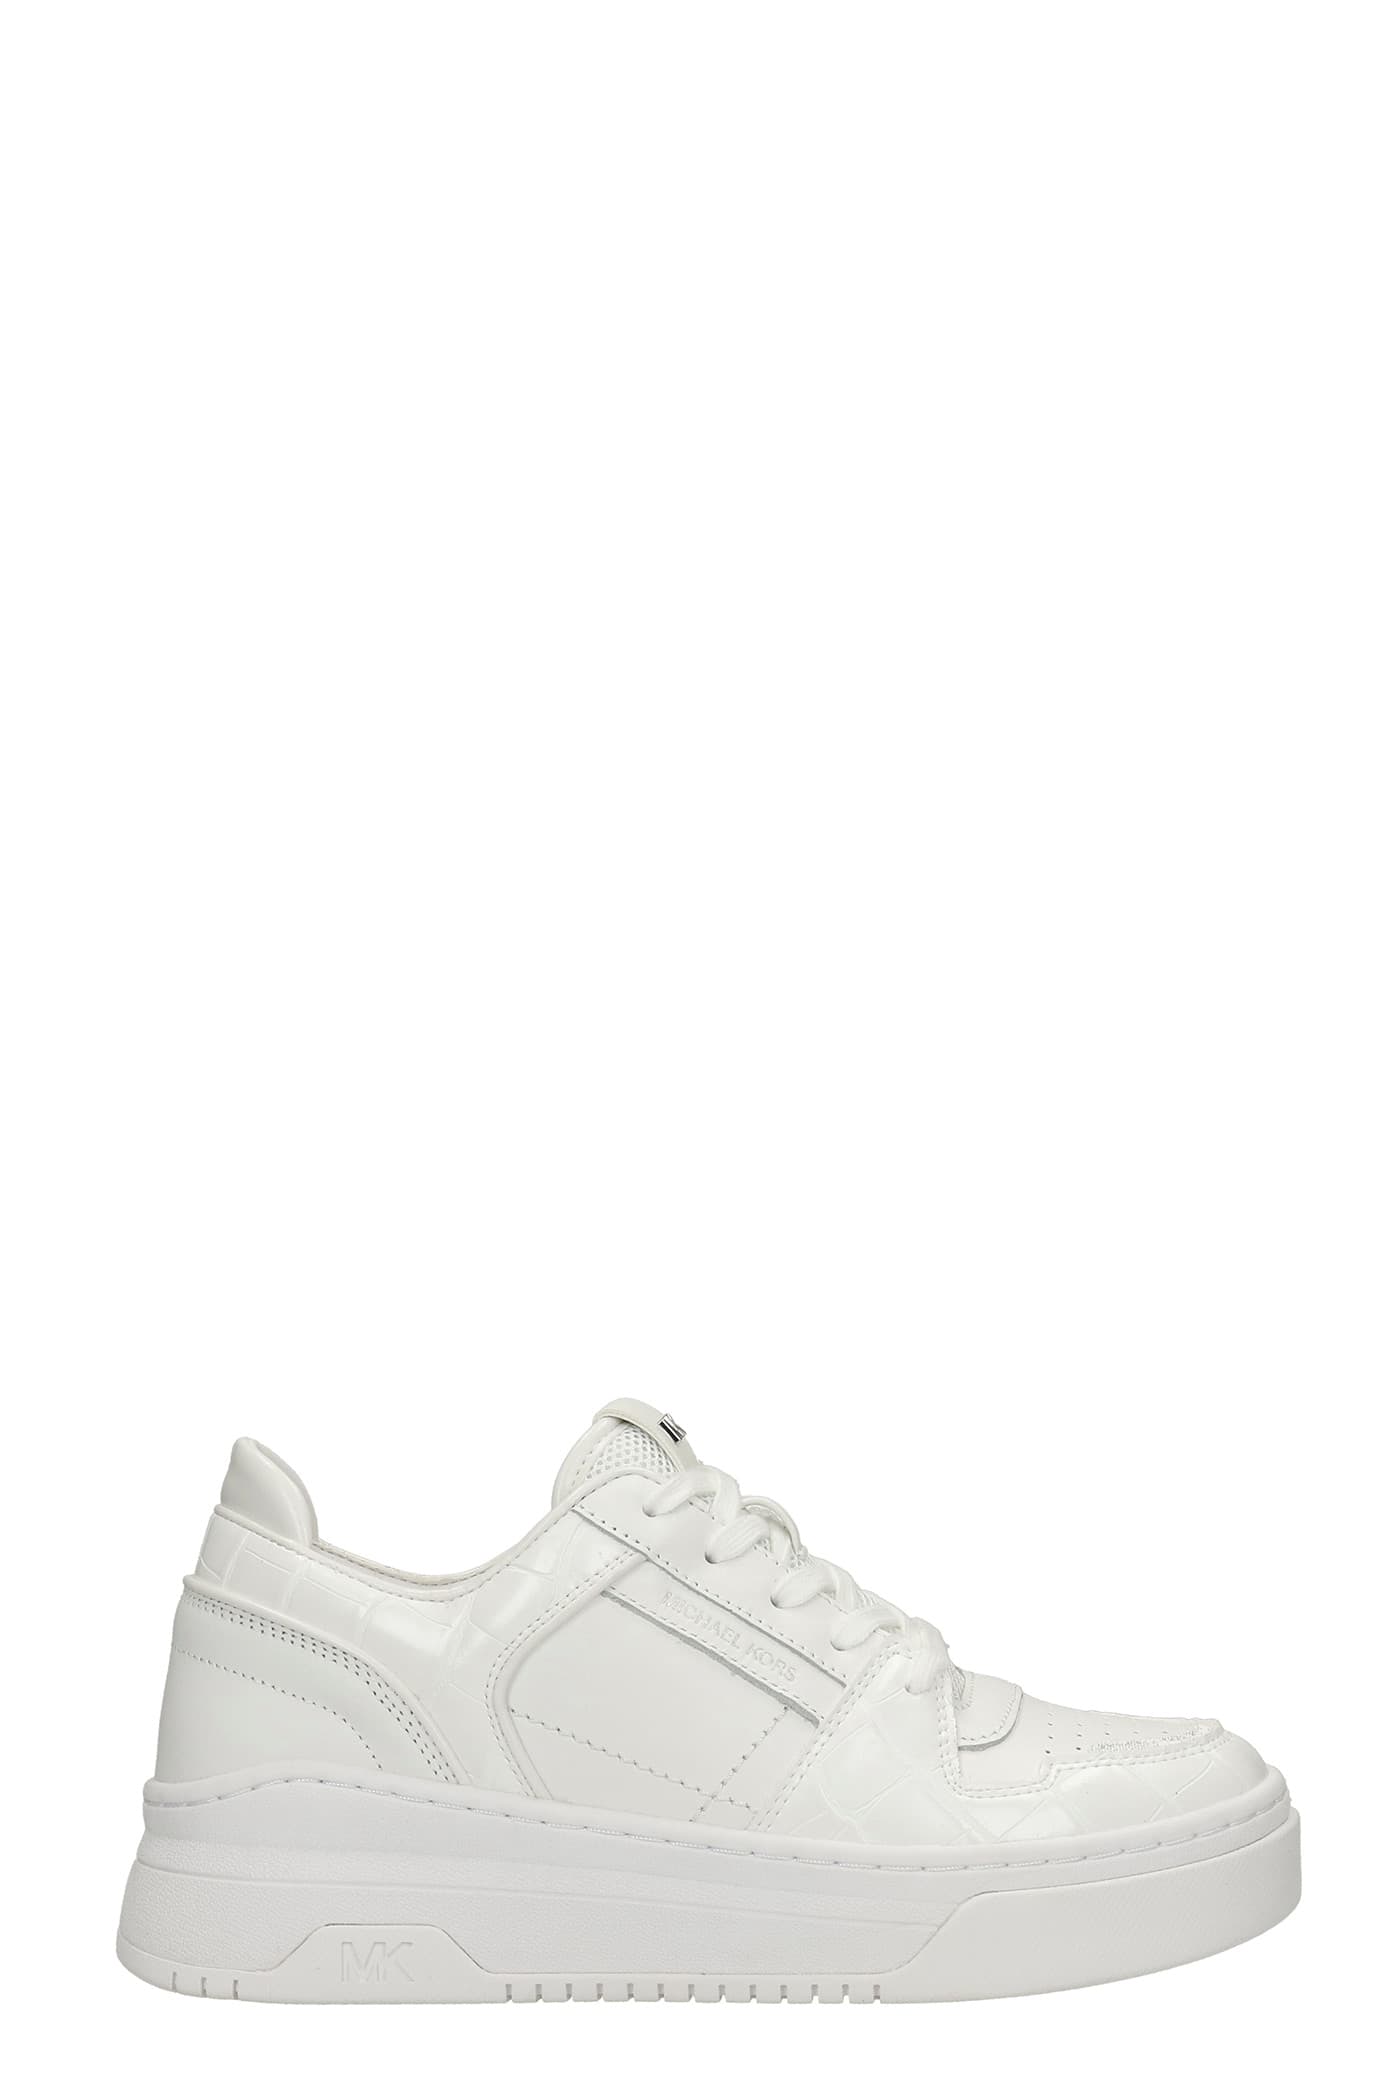 Michael Kors Lexi Sneakers In White Leather